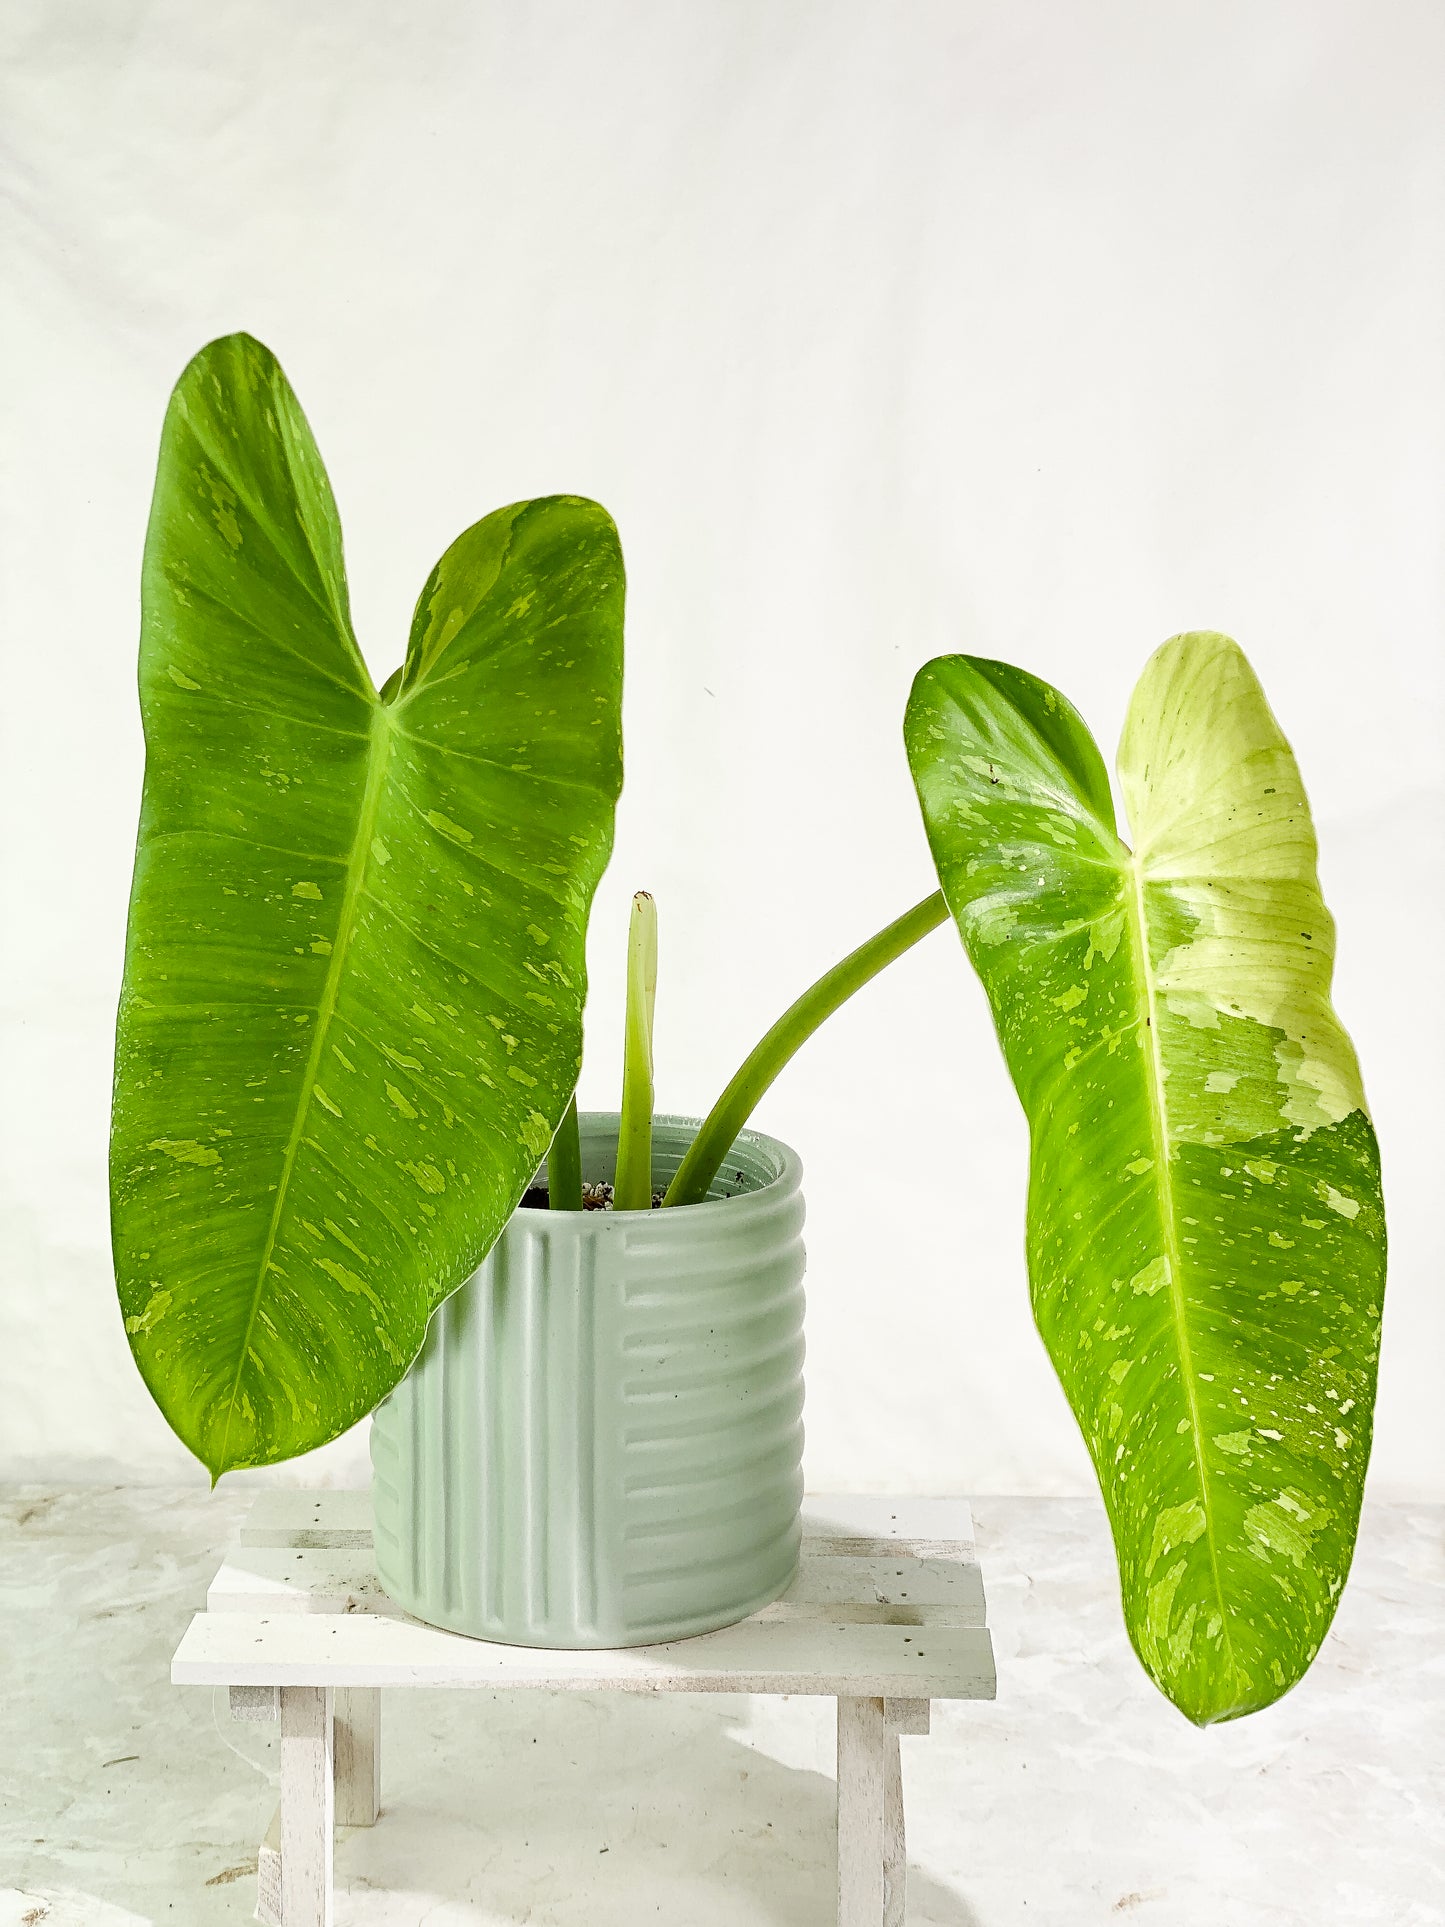 Philodendron Jose Buono Top Cutting 2 huge leaves & 1 sprout Rooting